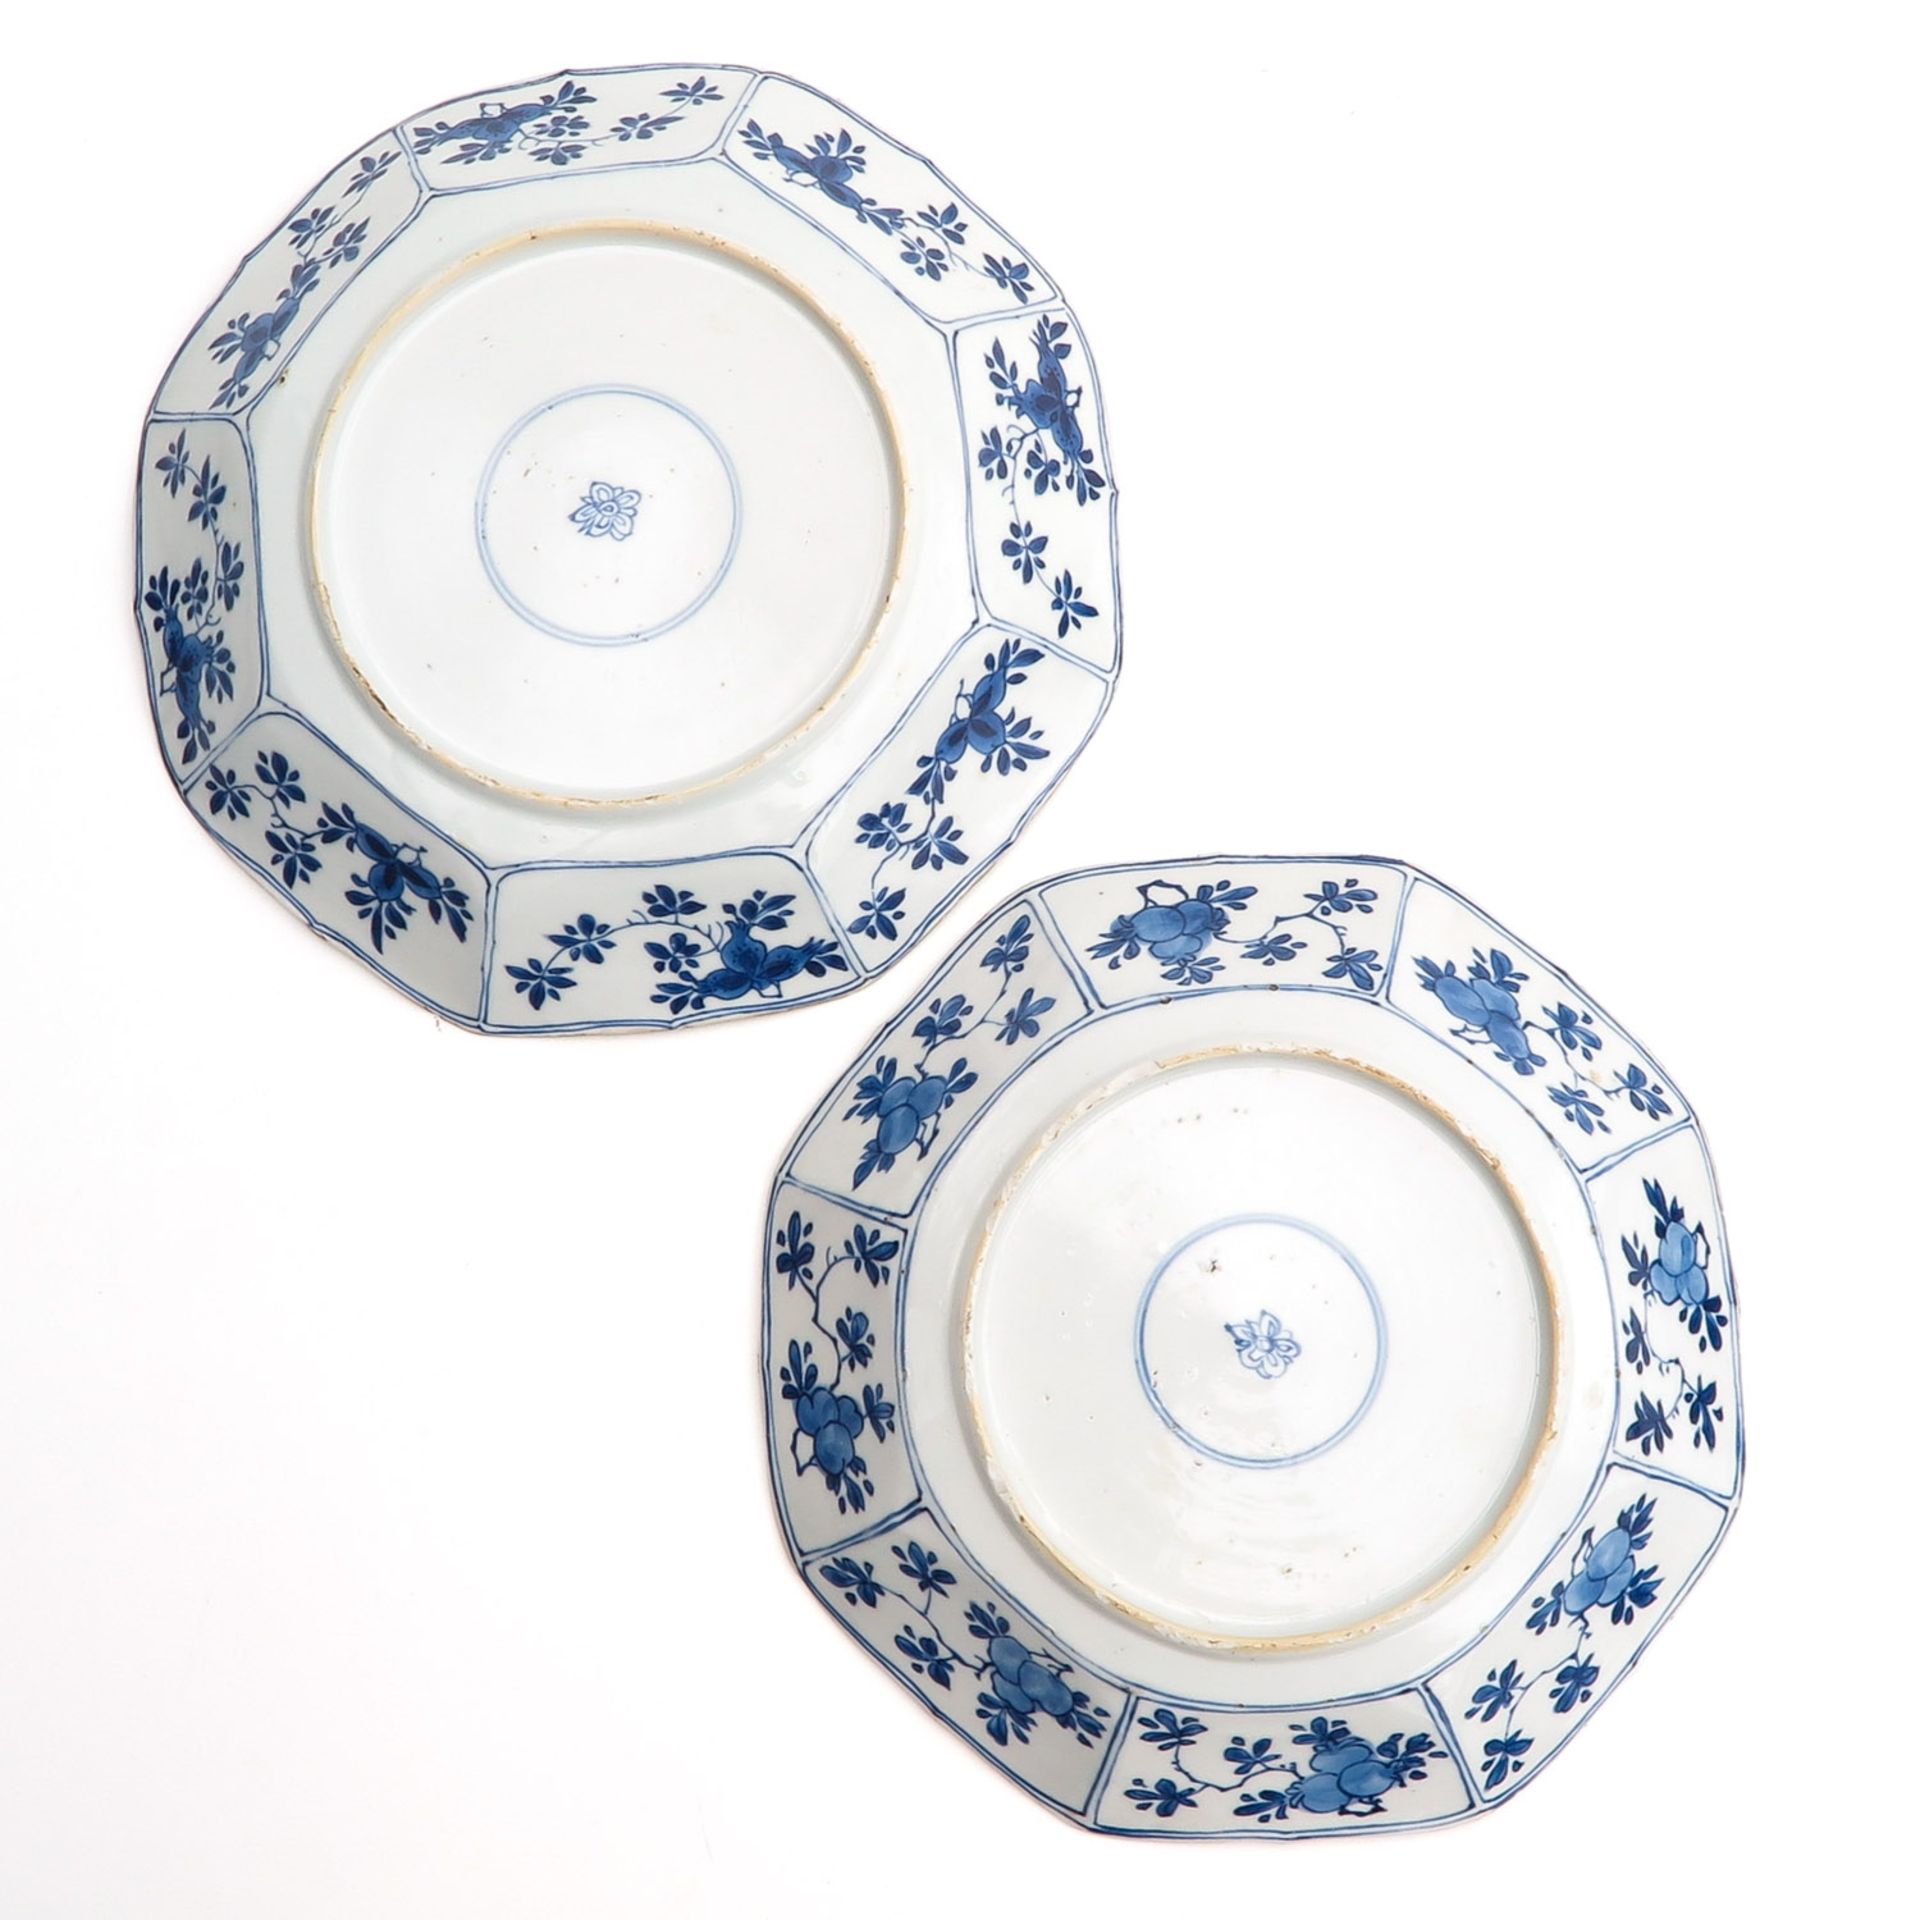 Two Blue and White Plates - Image 2 of 10